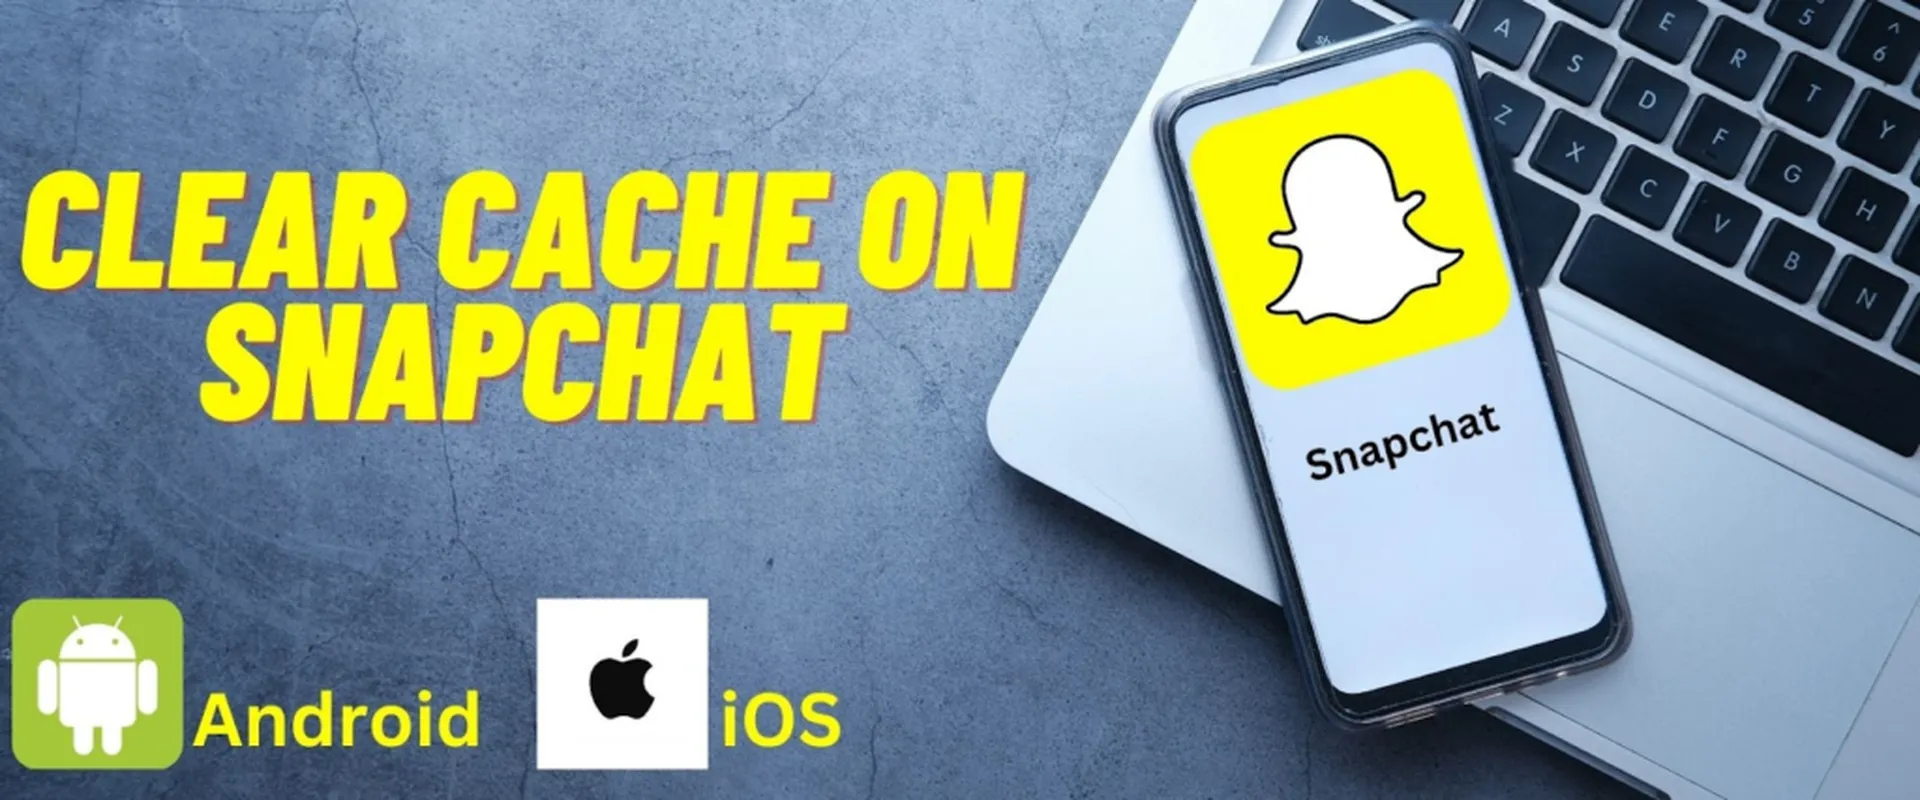 Clear Cache on Snapchat: The Key to a Smooth User Experience